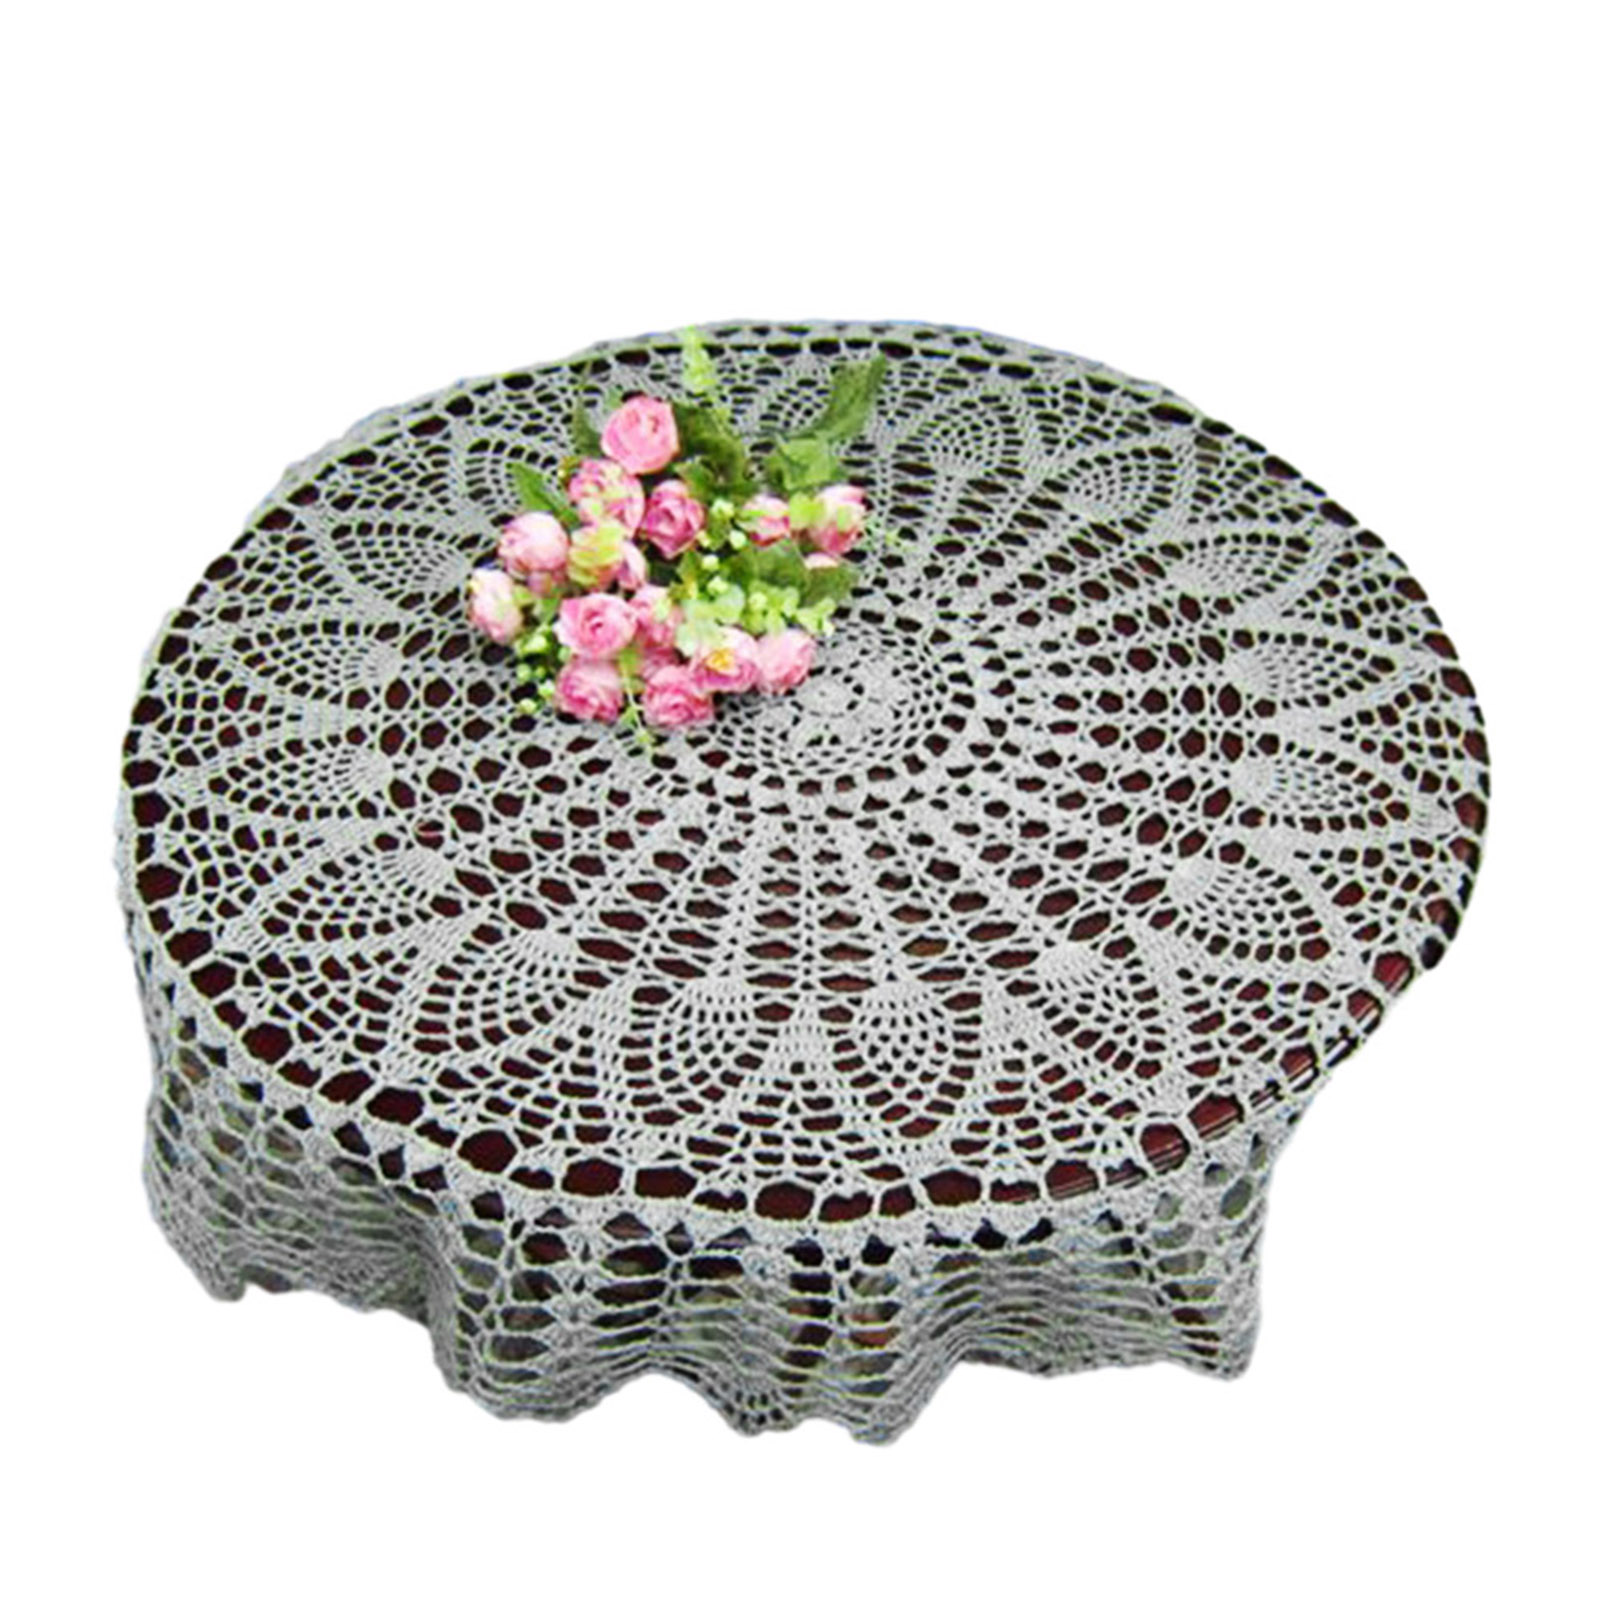 Vintage Round Table Cloth Topper Hand Crochet Lace Tablecloth Floral 27-29inch 